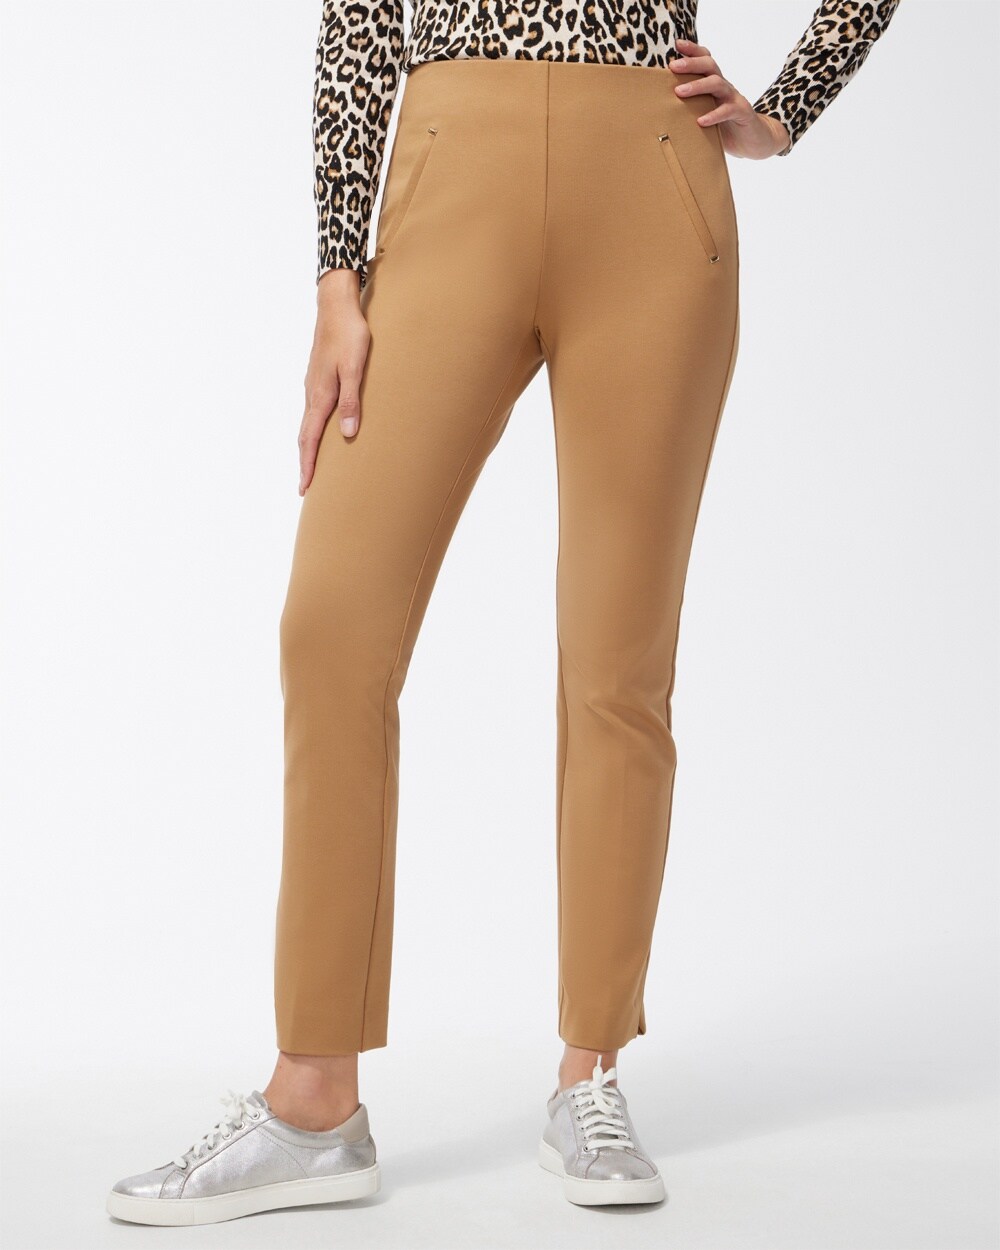 So Slimming by Chico's Brown Pants, Men's Fashion, Bottoms, Jeans